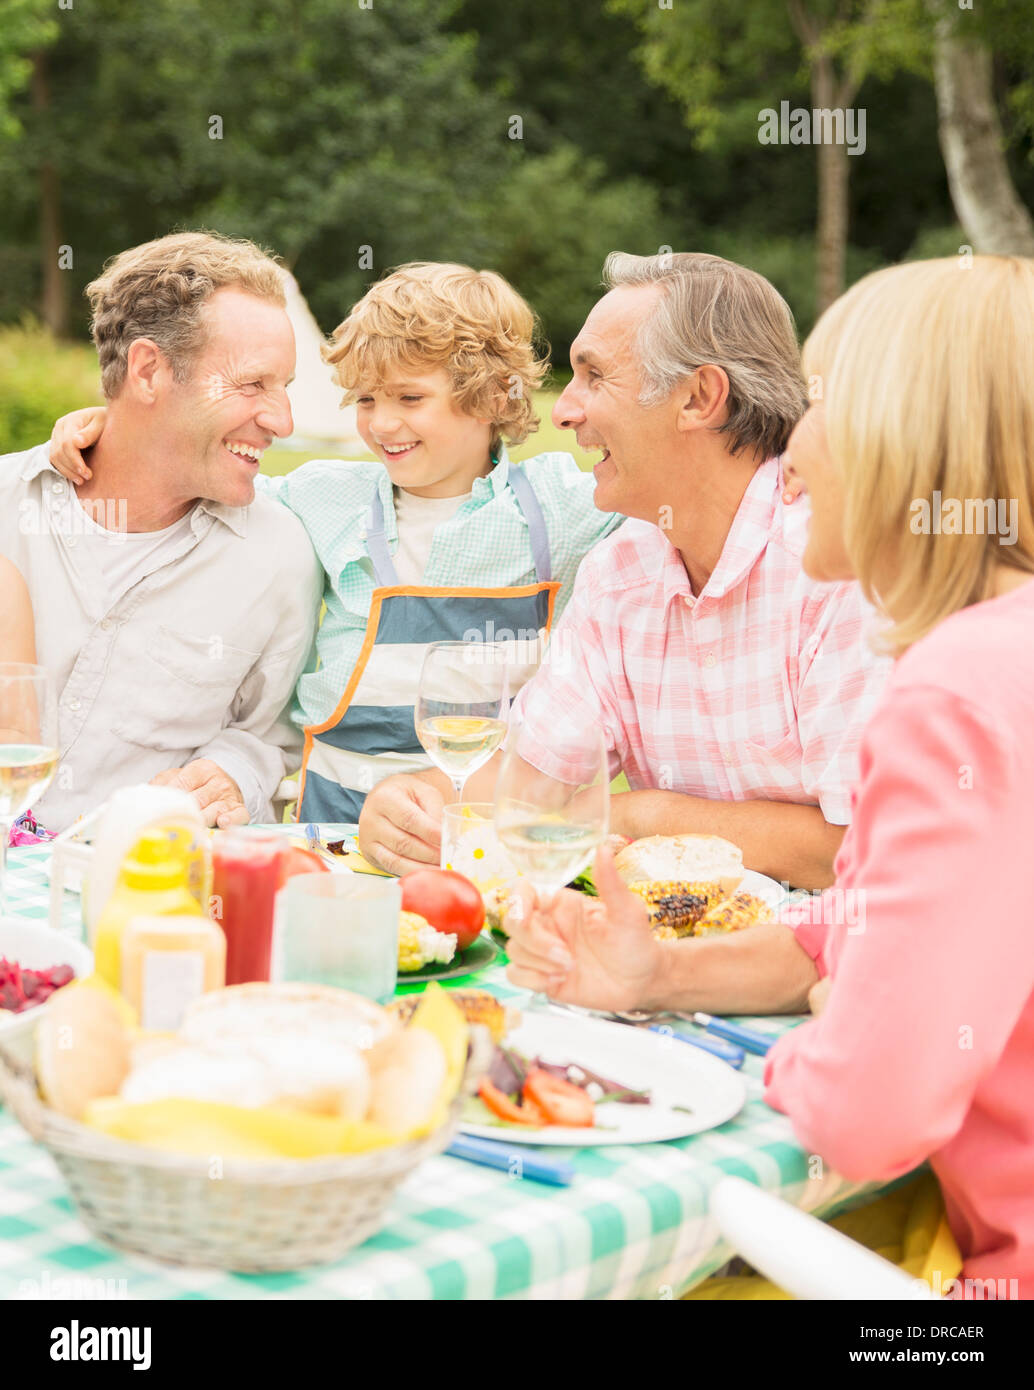 Family enjoying lunch at table in backyard Stock Photo